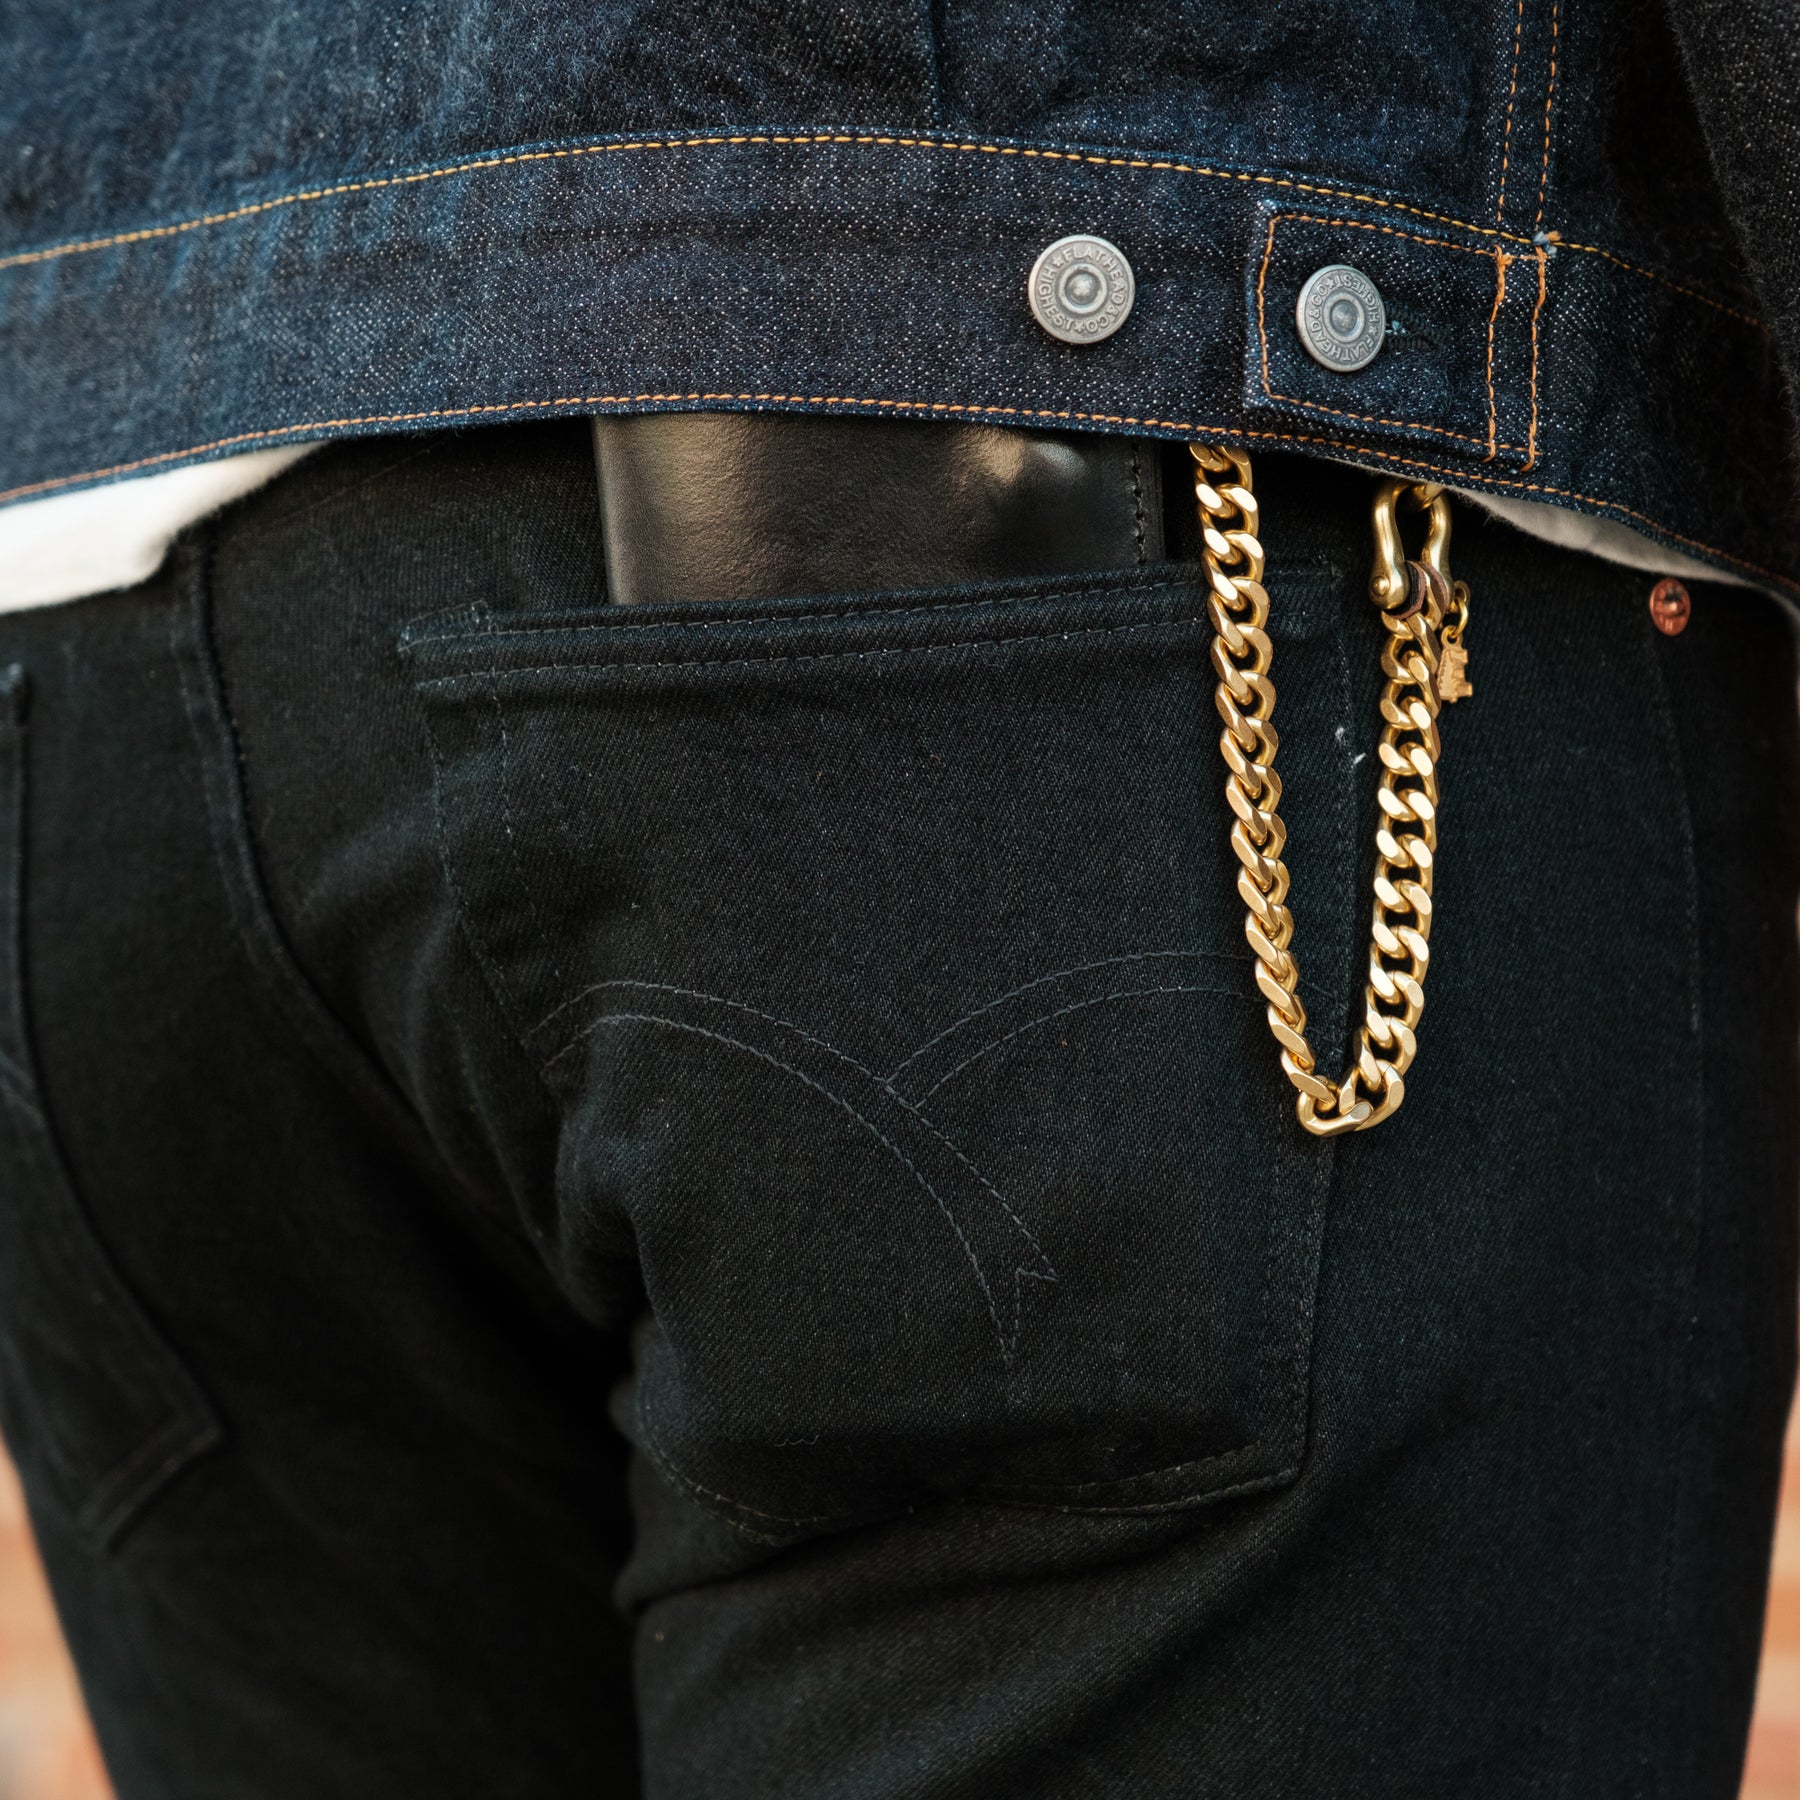 The Jeans Black Tapered Flat Head Straight